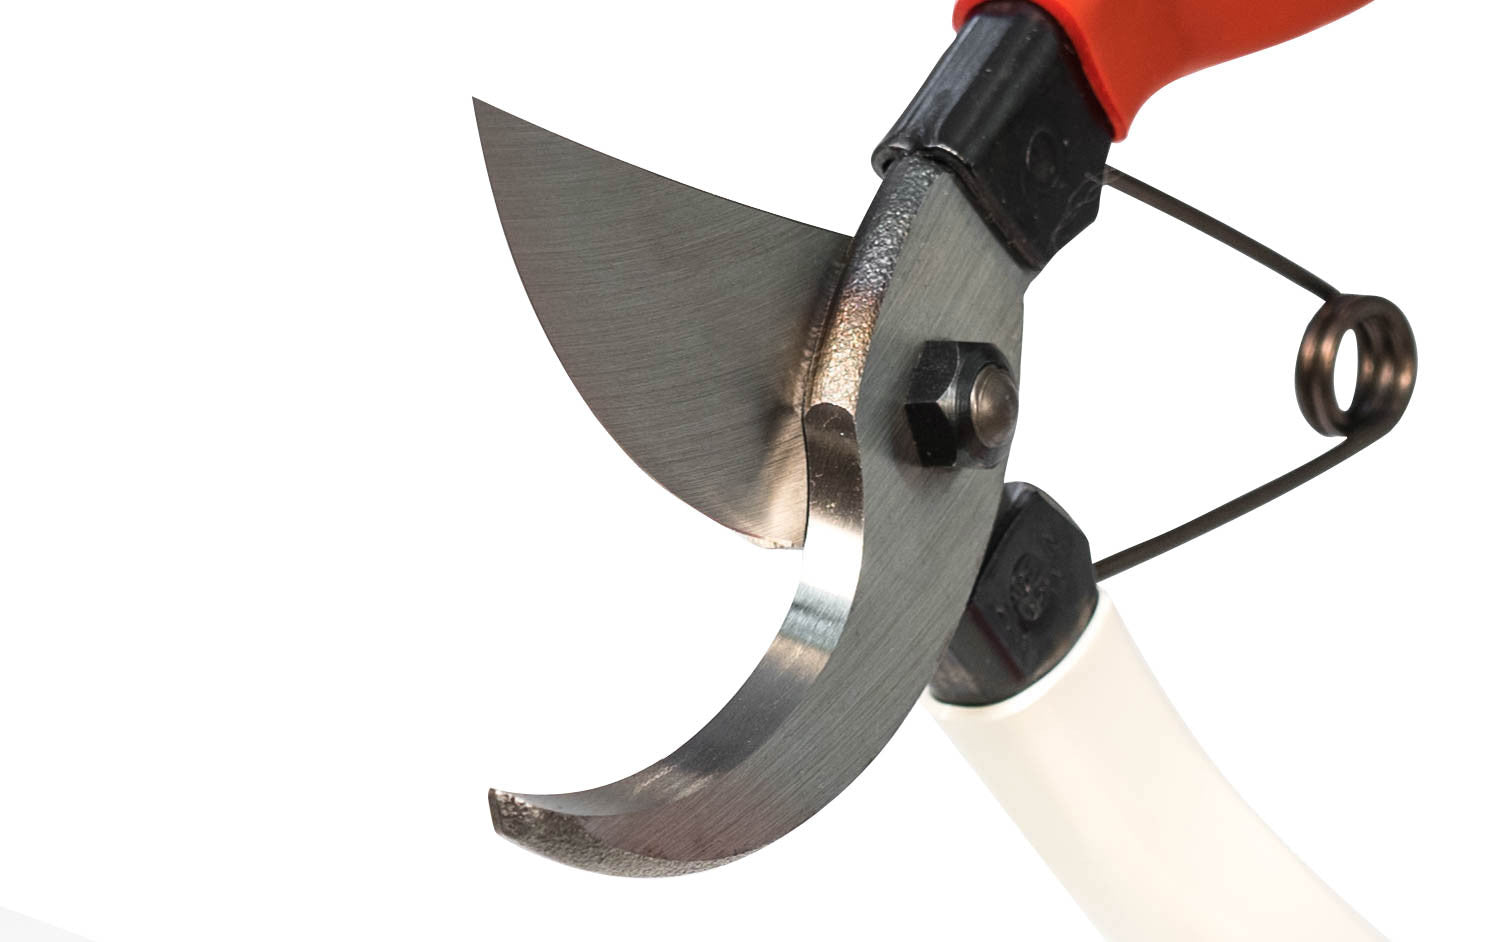 The Japanese Okatsune No. 104 bypass large pruners are excellent high quality elegant pruners. 8-1/4